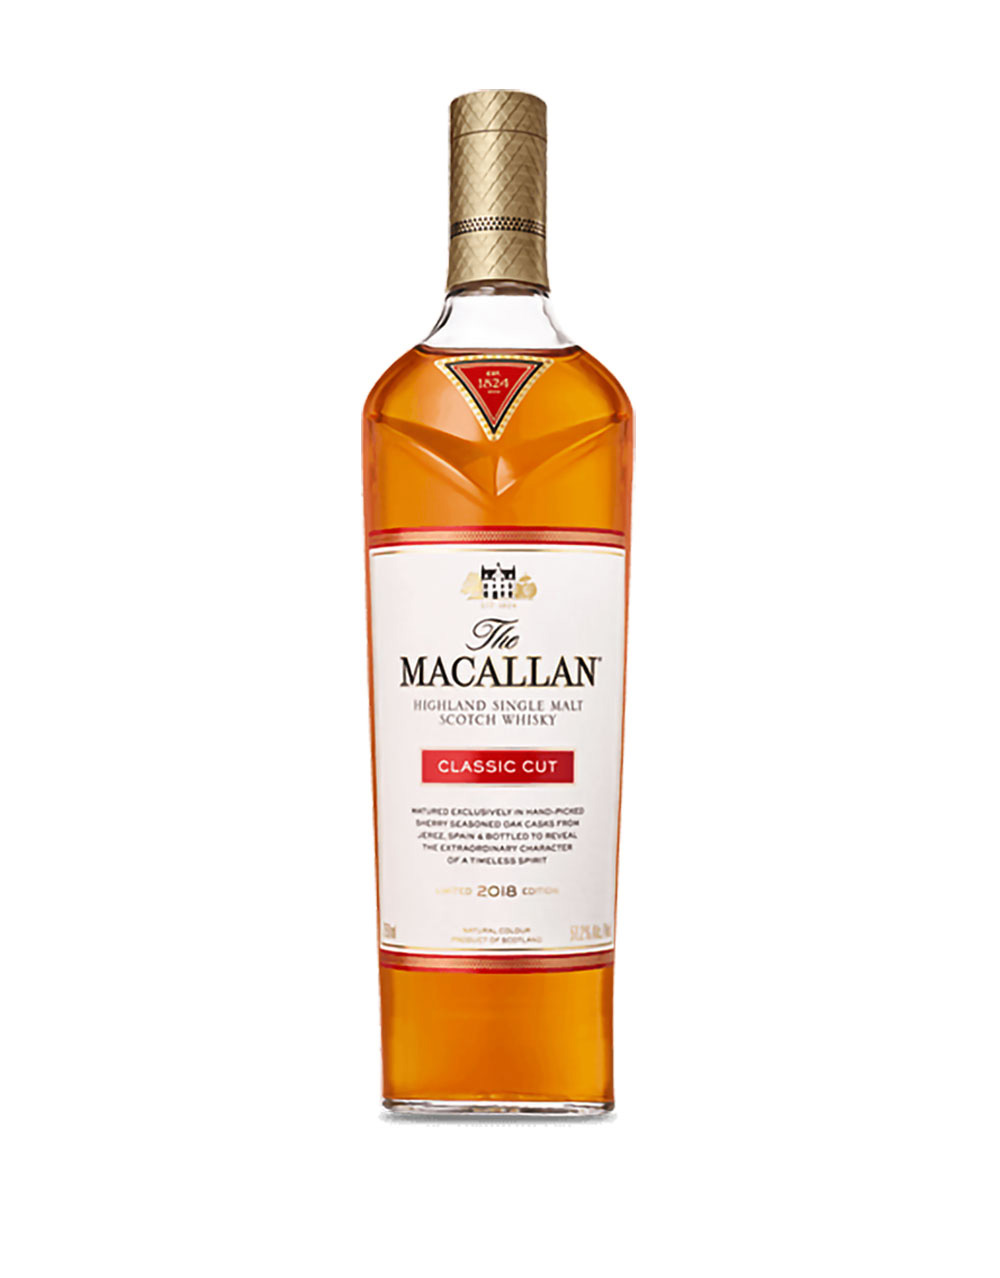 The Macallan Classic Cut Limited Edition 2018